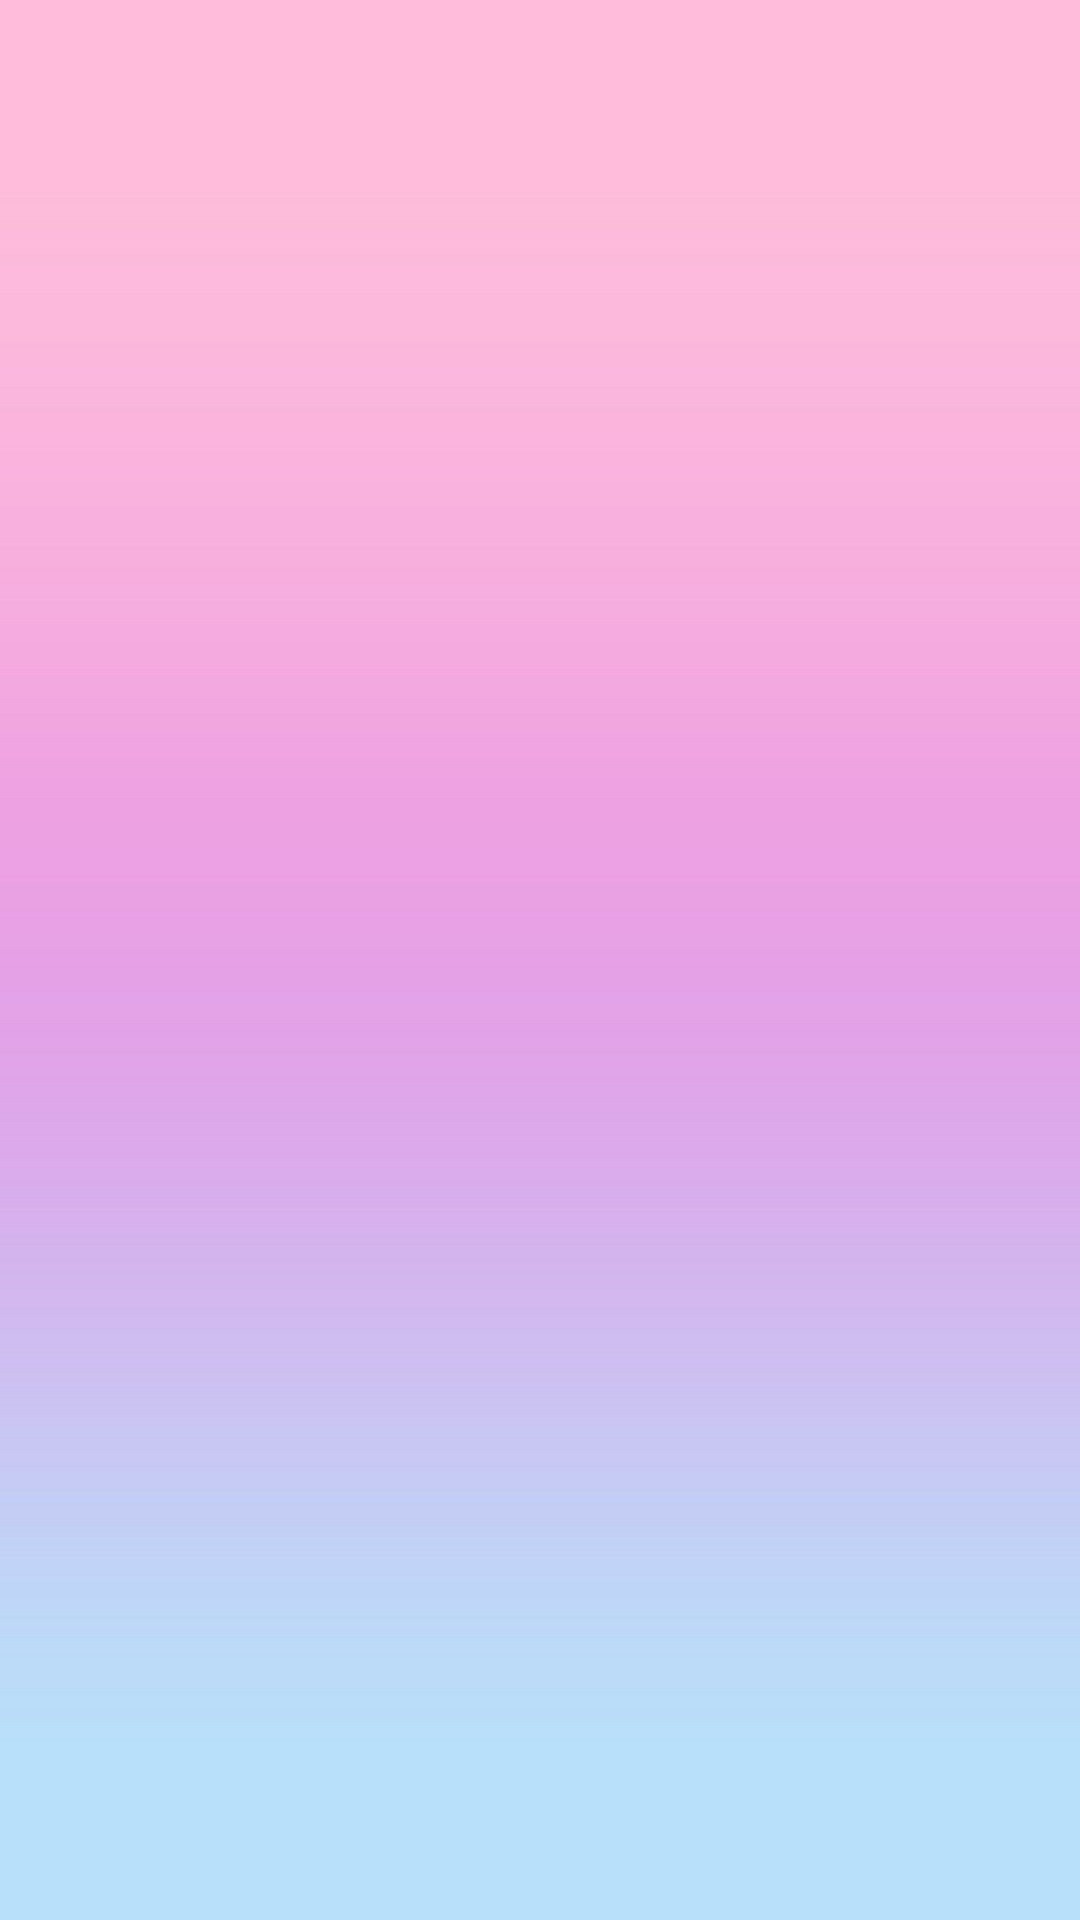 Gradient Wallpaper For Android With high-resolution 1080X1920 pixel. You can use this wallpaper for your Android backgrounds, Tablet, Samsung Screensavers, Mobile Phone Lock Screen and another Smartphones device